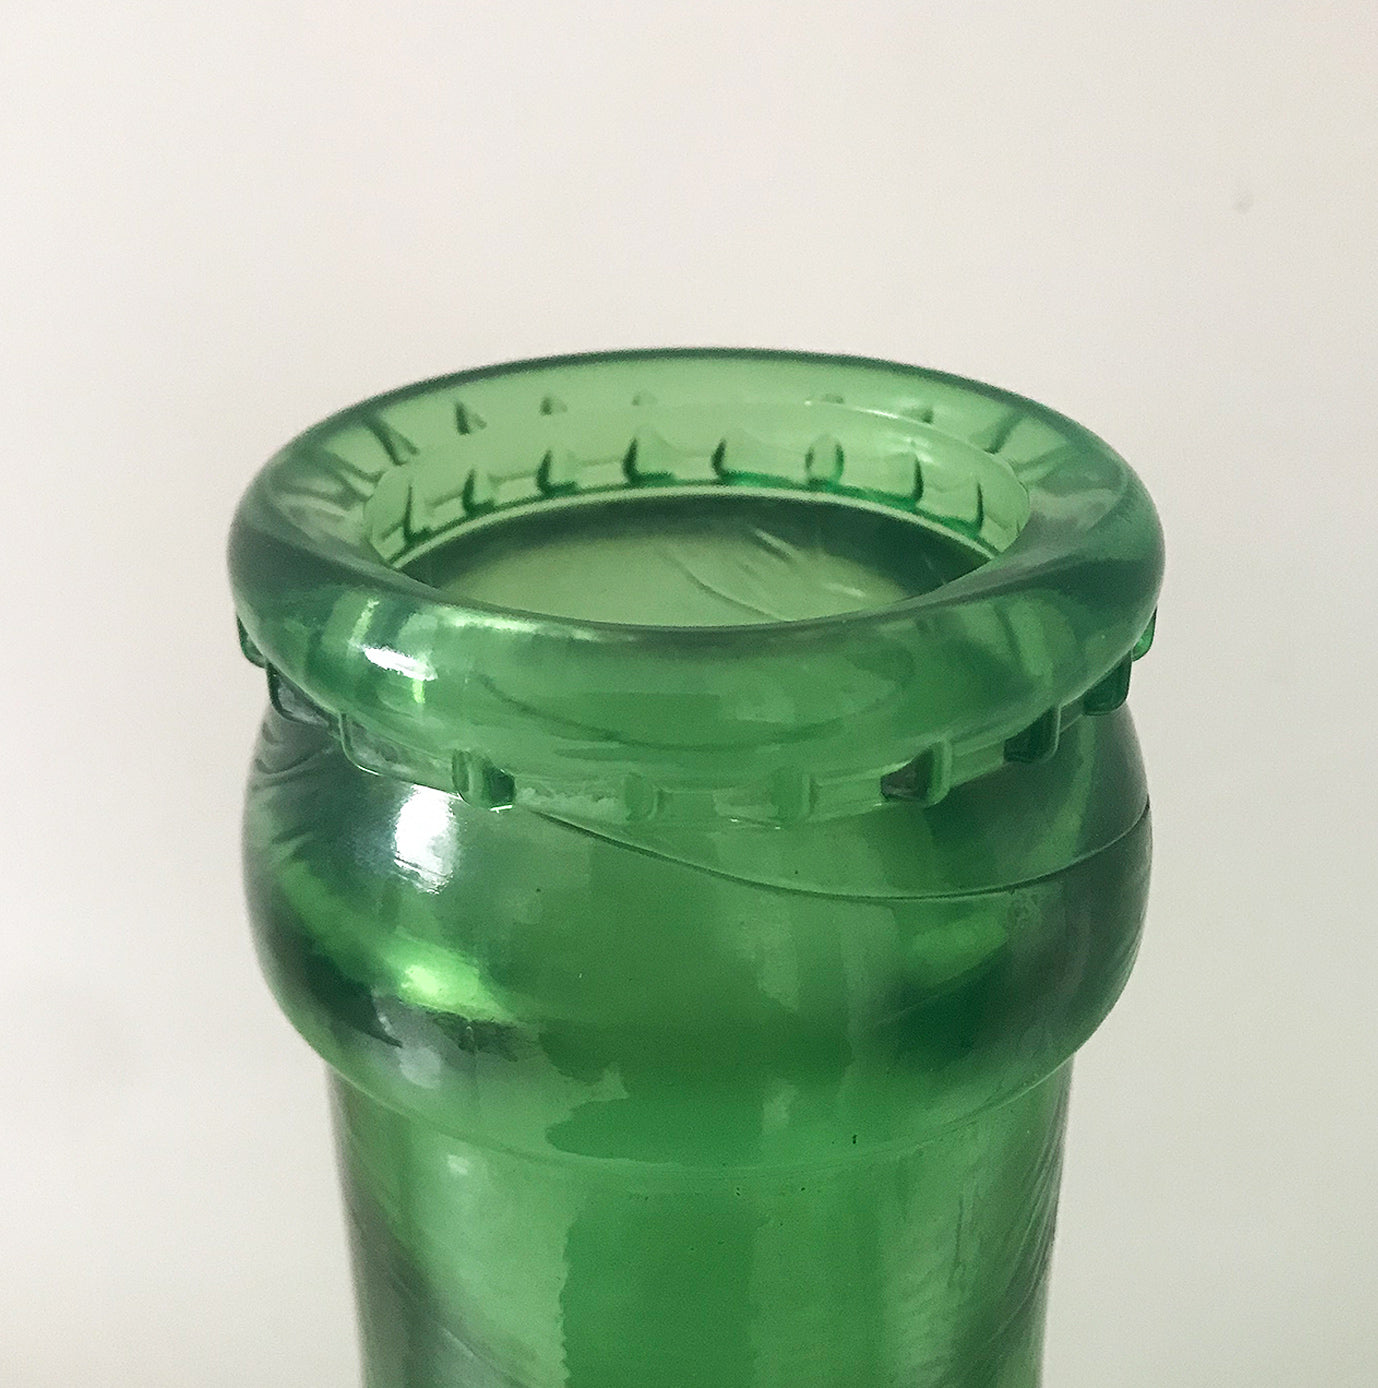 Huge, great big Perrier Glass Advertising Bottle measuring a whopping 51cm tall! Great decorators piece or somewhere cool to keep your cash - SHOP NOW - www.intovintage.co.uk